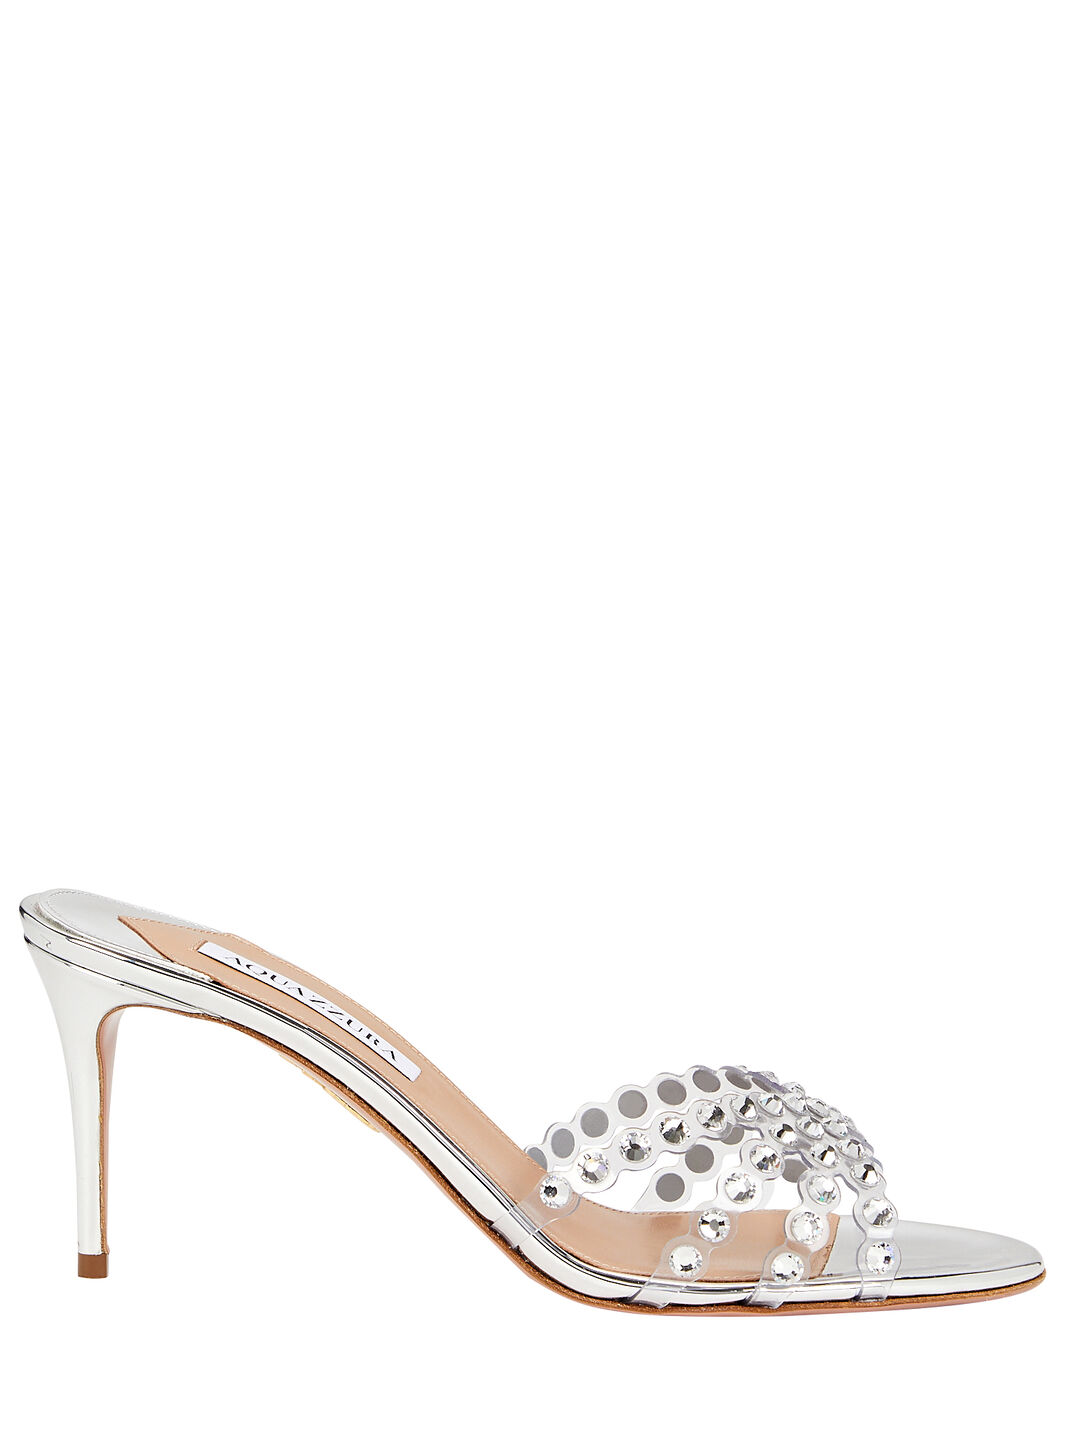 Tequila 75 Crystal-Embellished PVC Mules